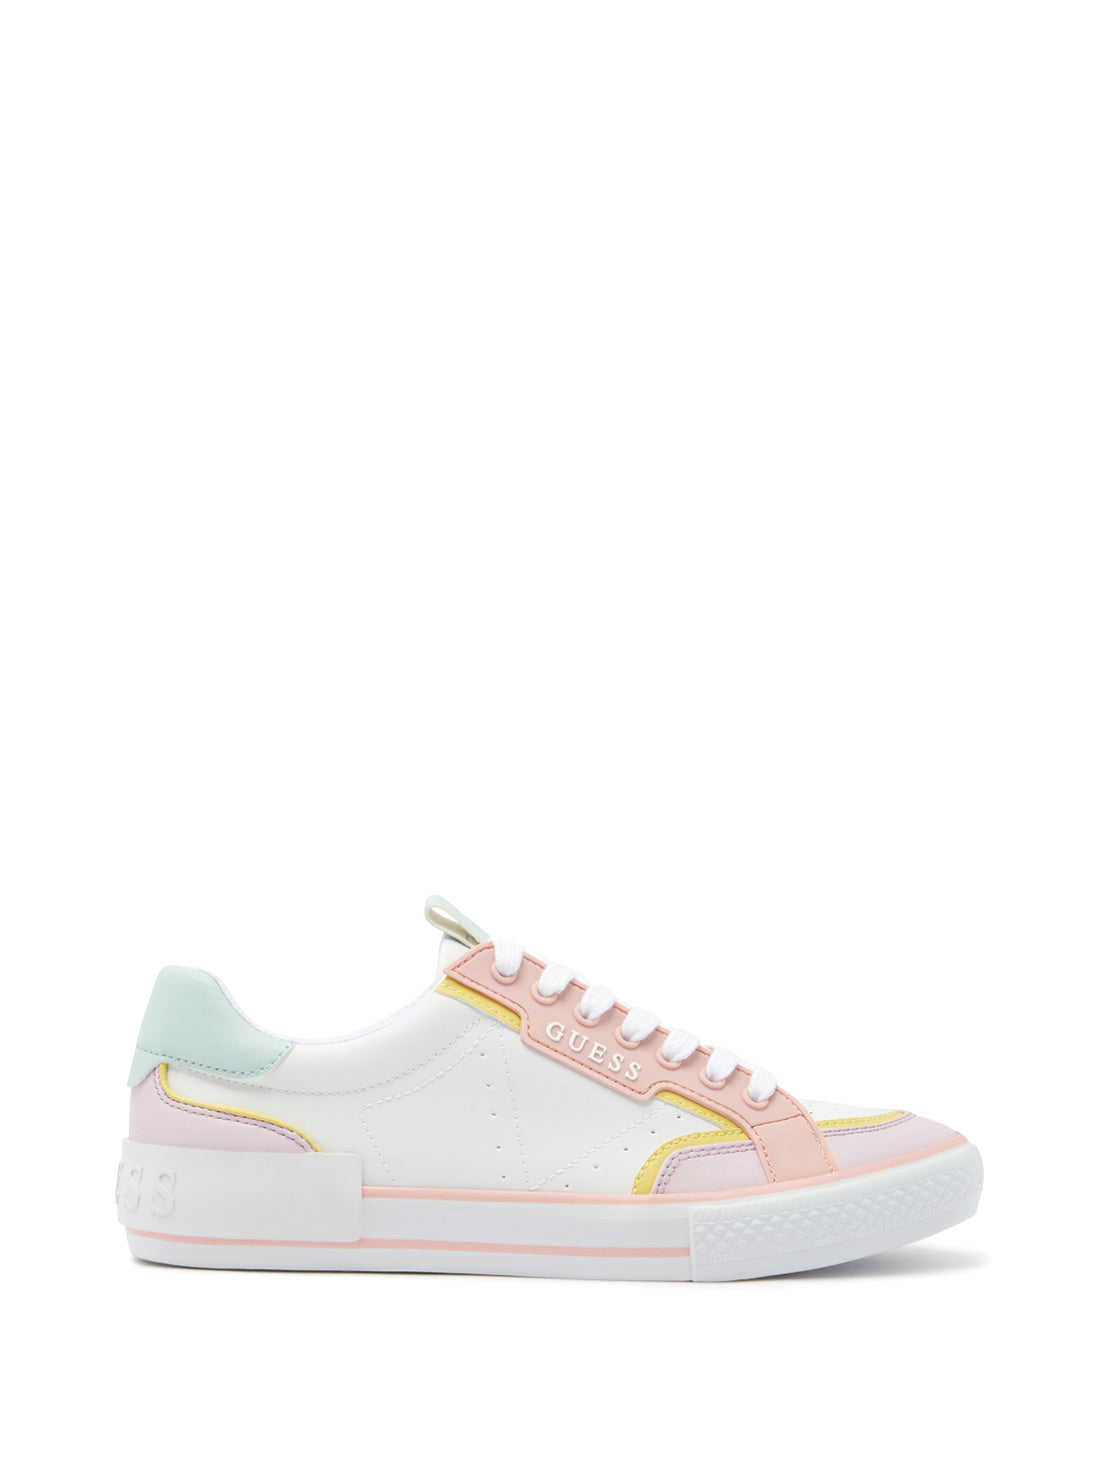 GUESS Women's White Pink Lollin Low Top Sneakers LOLLIN-A WHI04 Side View